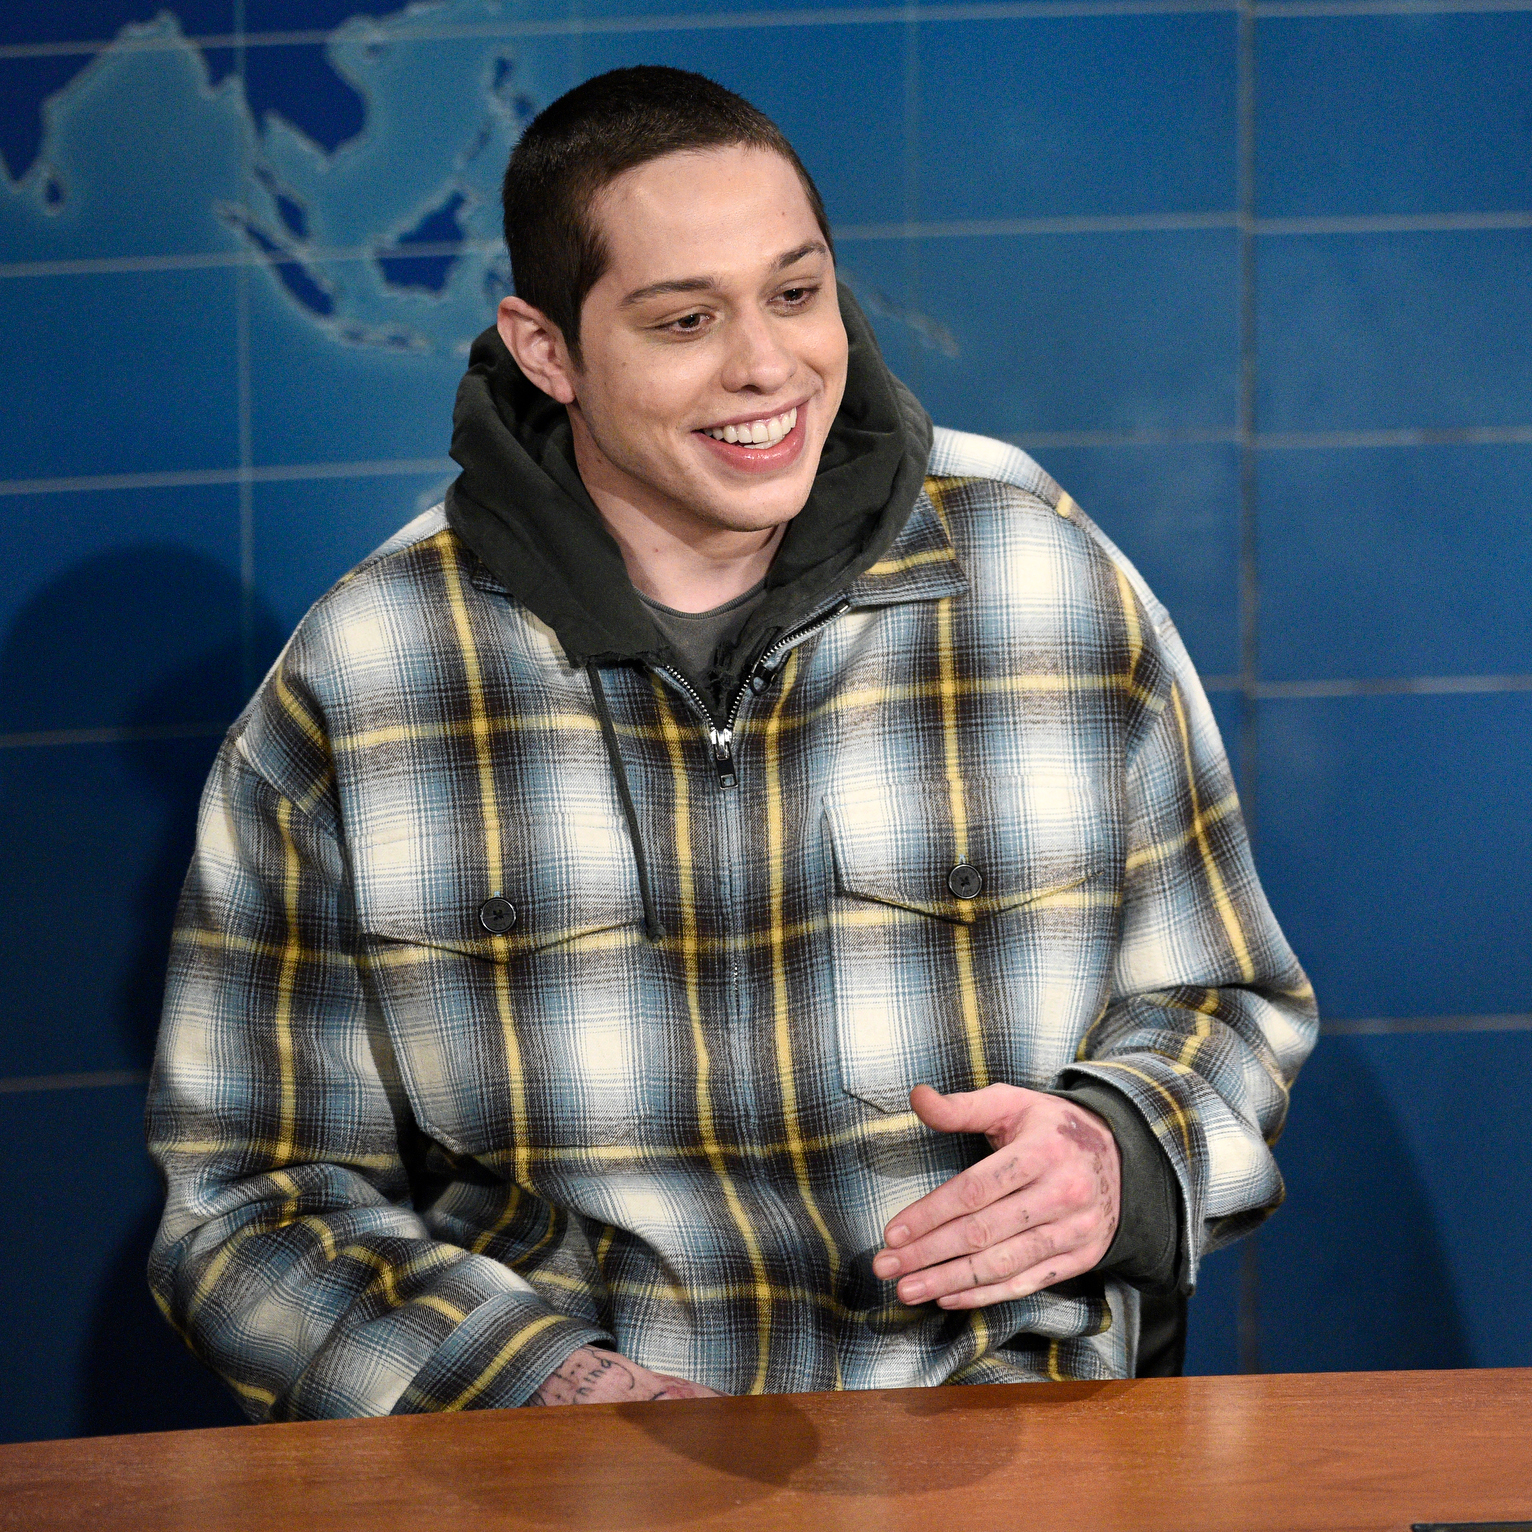 Pete Davidson Hints at 'Saturday Night Live' Exit: 'I'm Ready to Hang Up the Jersey'